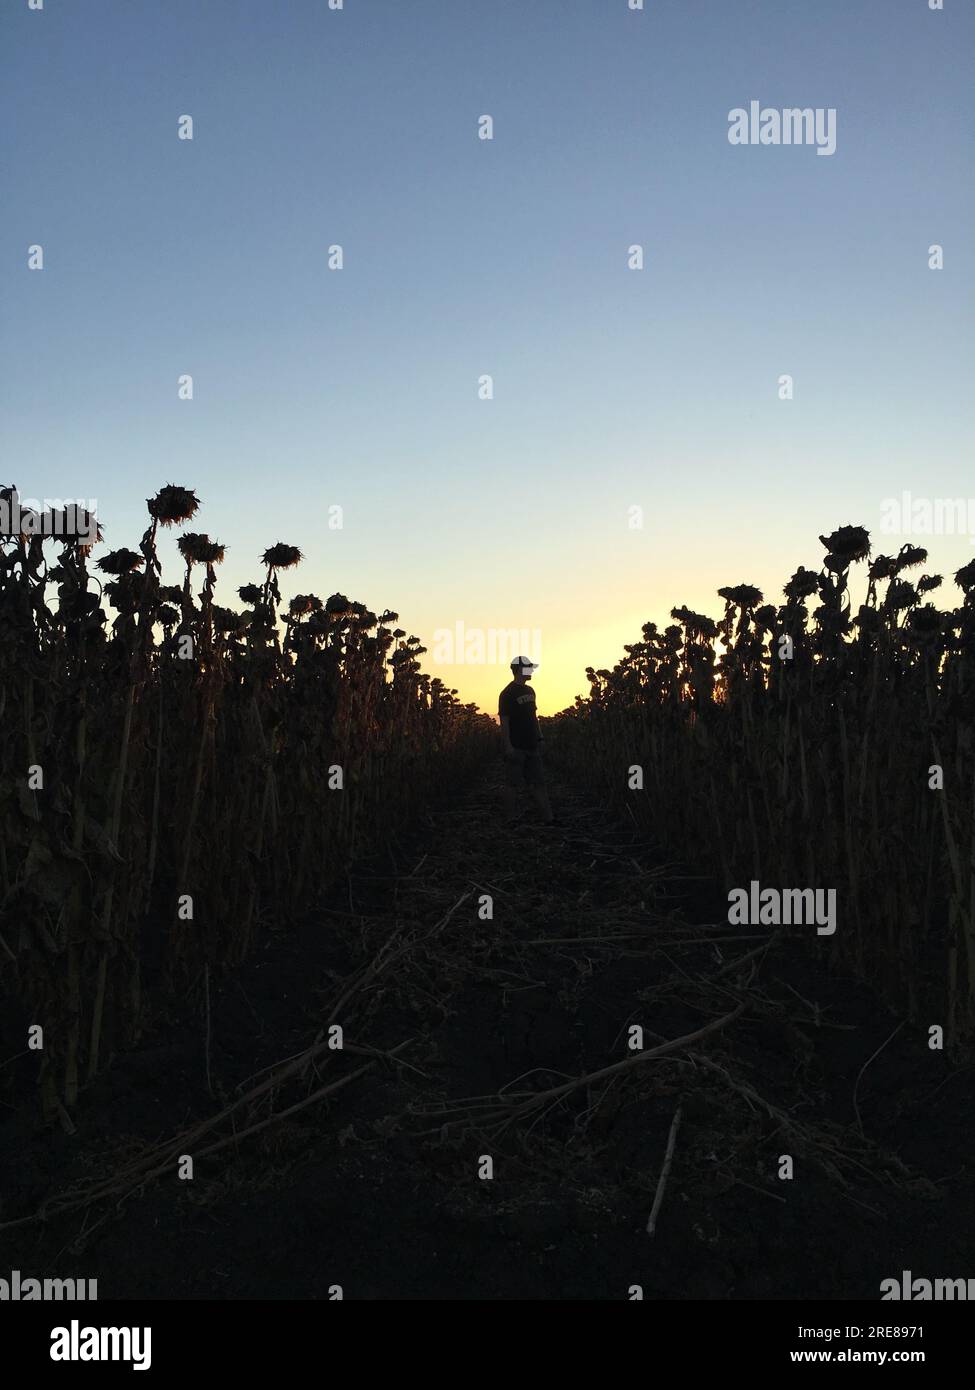 Silhouette of a man in a baseball cap standing in a Sunflower Field at Dusk, Dixon, California, USA Stock Photo